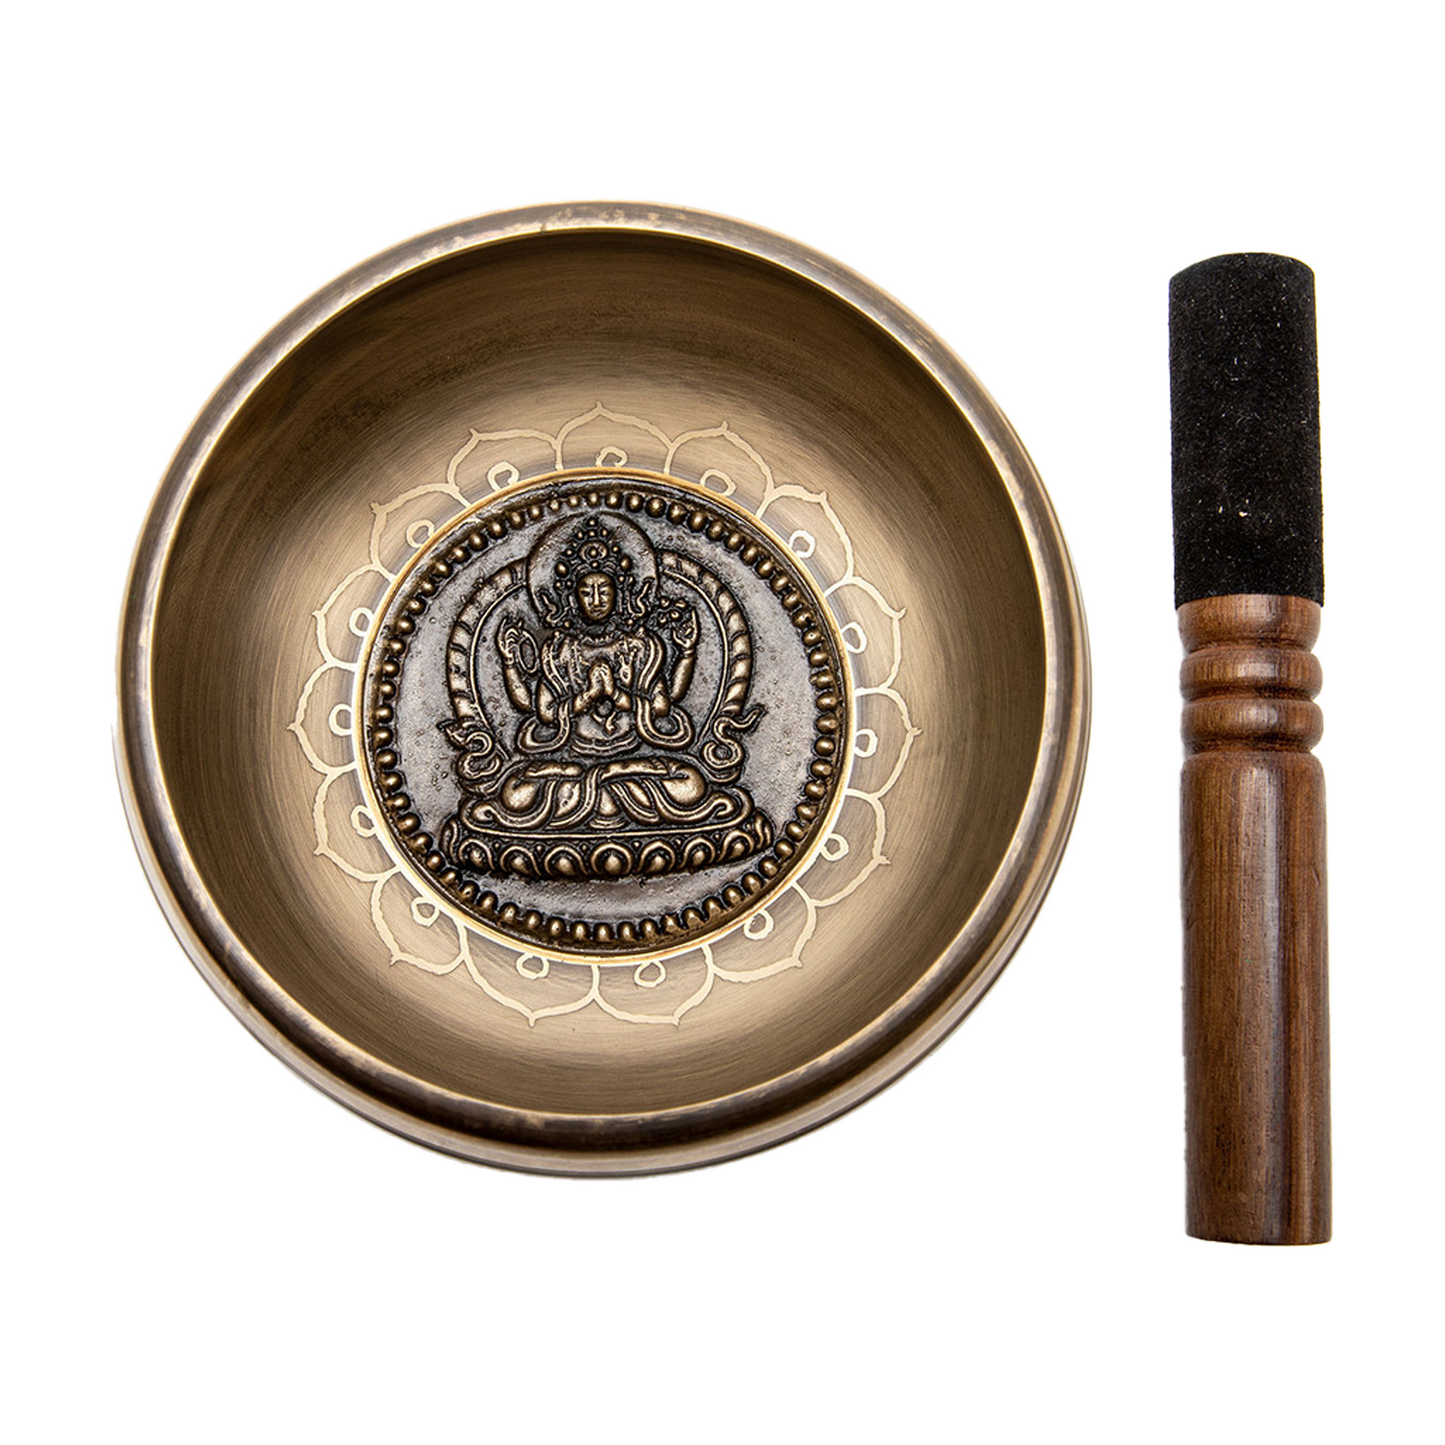 Inside view of the Avalokiteshvara Singing Bowl against a solid white backdrop. The mallet lays vertically beside it.